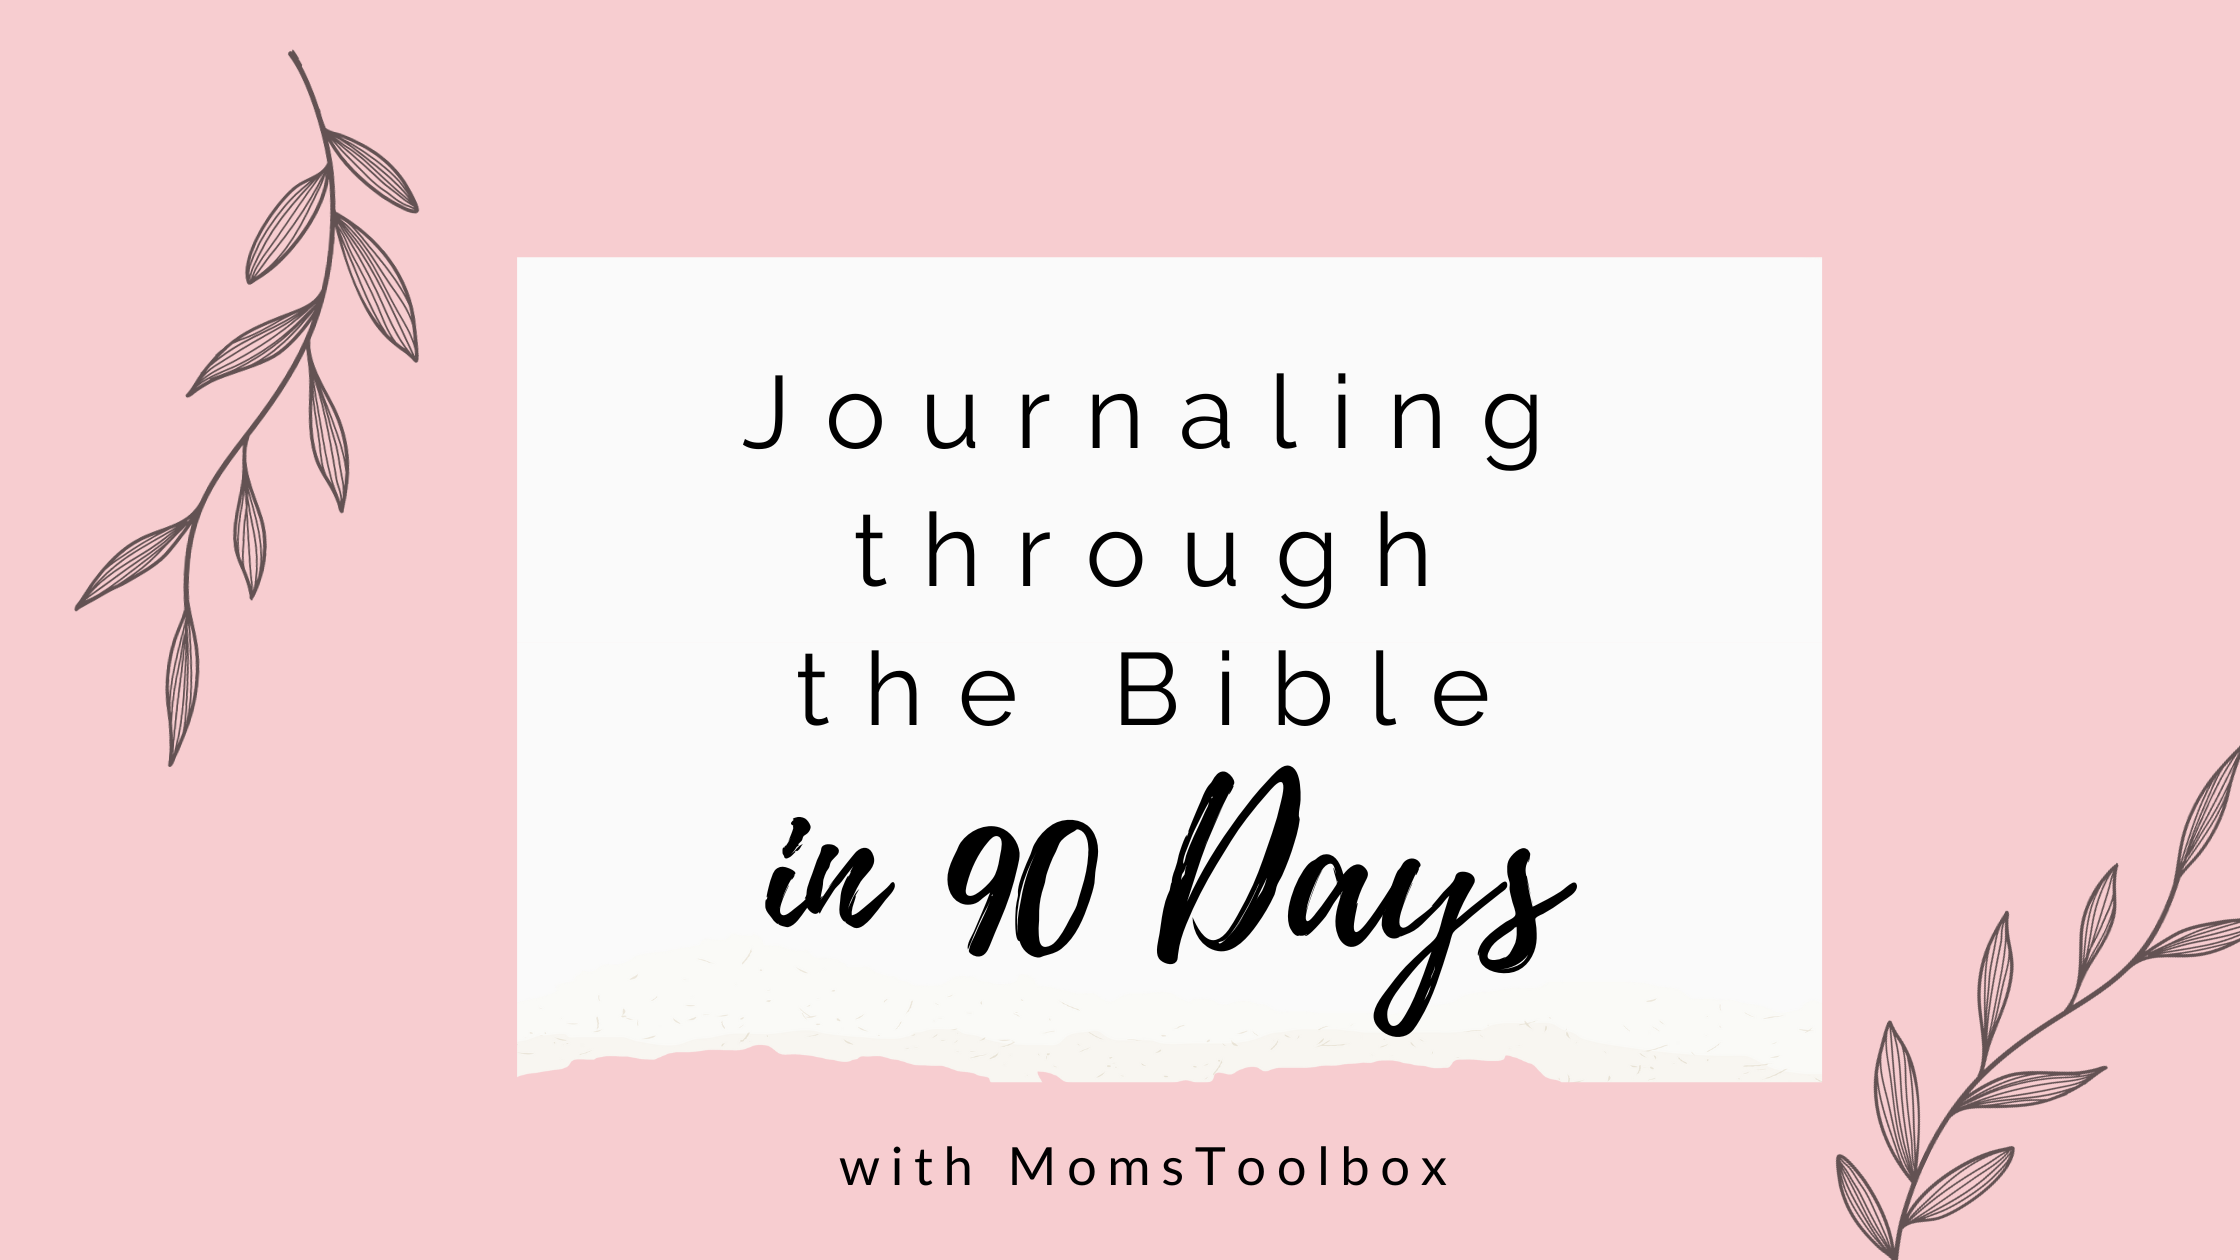 Journaling through the Bible in 90 days: Day 1